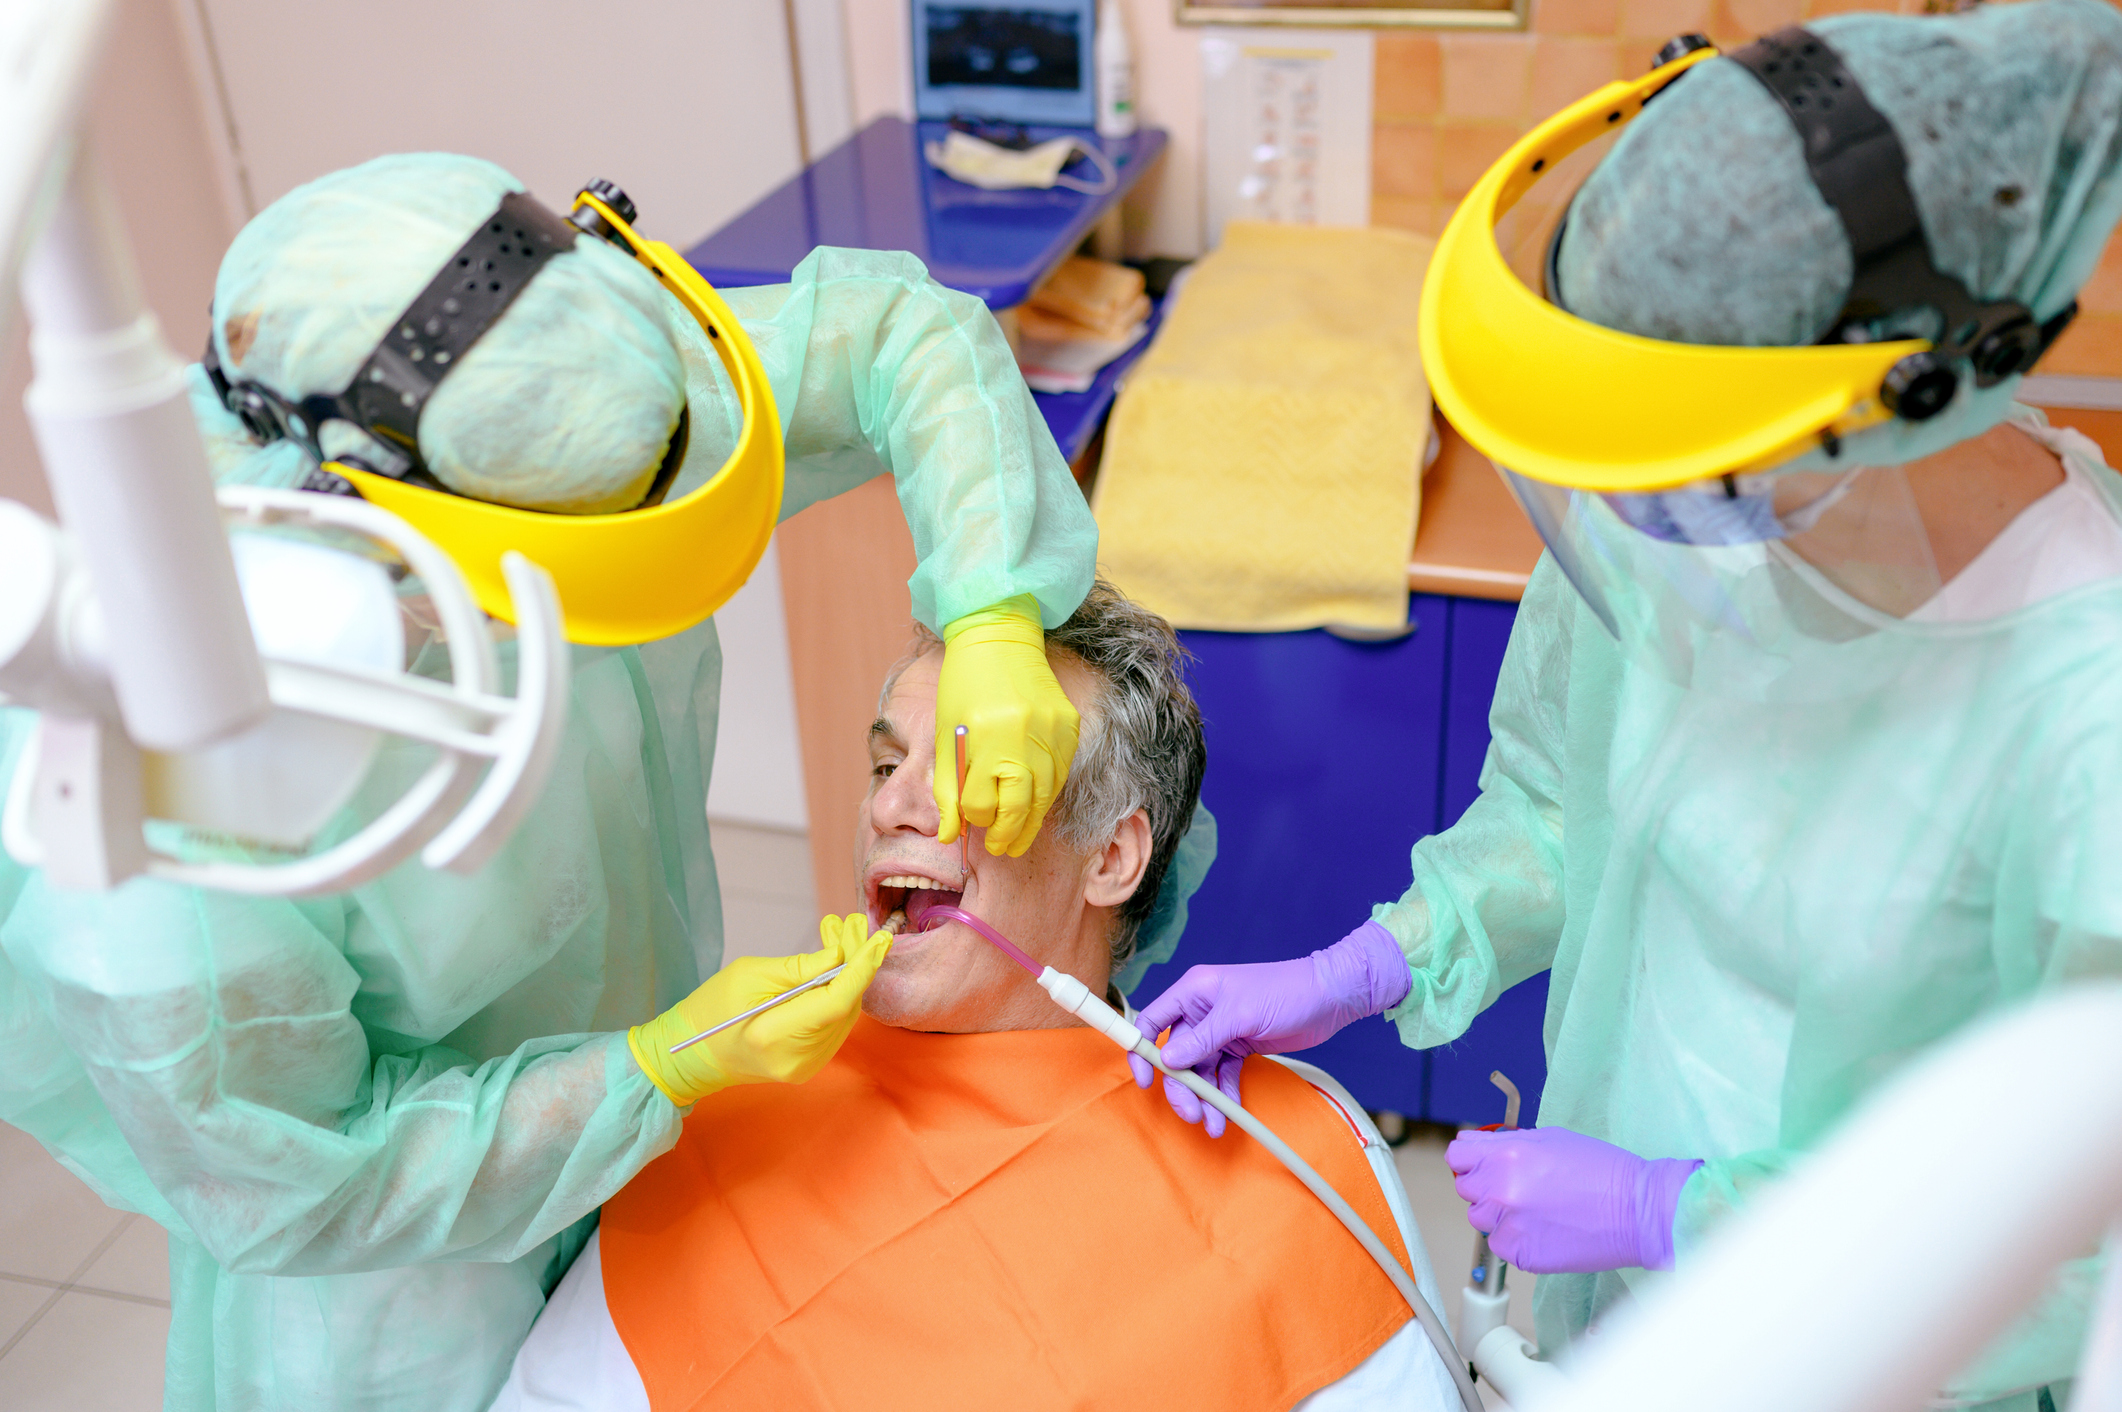 Client Alert: Guidance for Re-Opening Dental Practices During the COVID-19 Pandemic